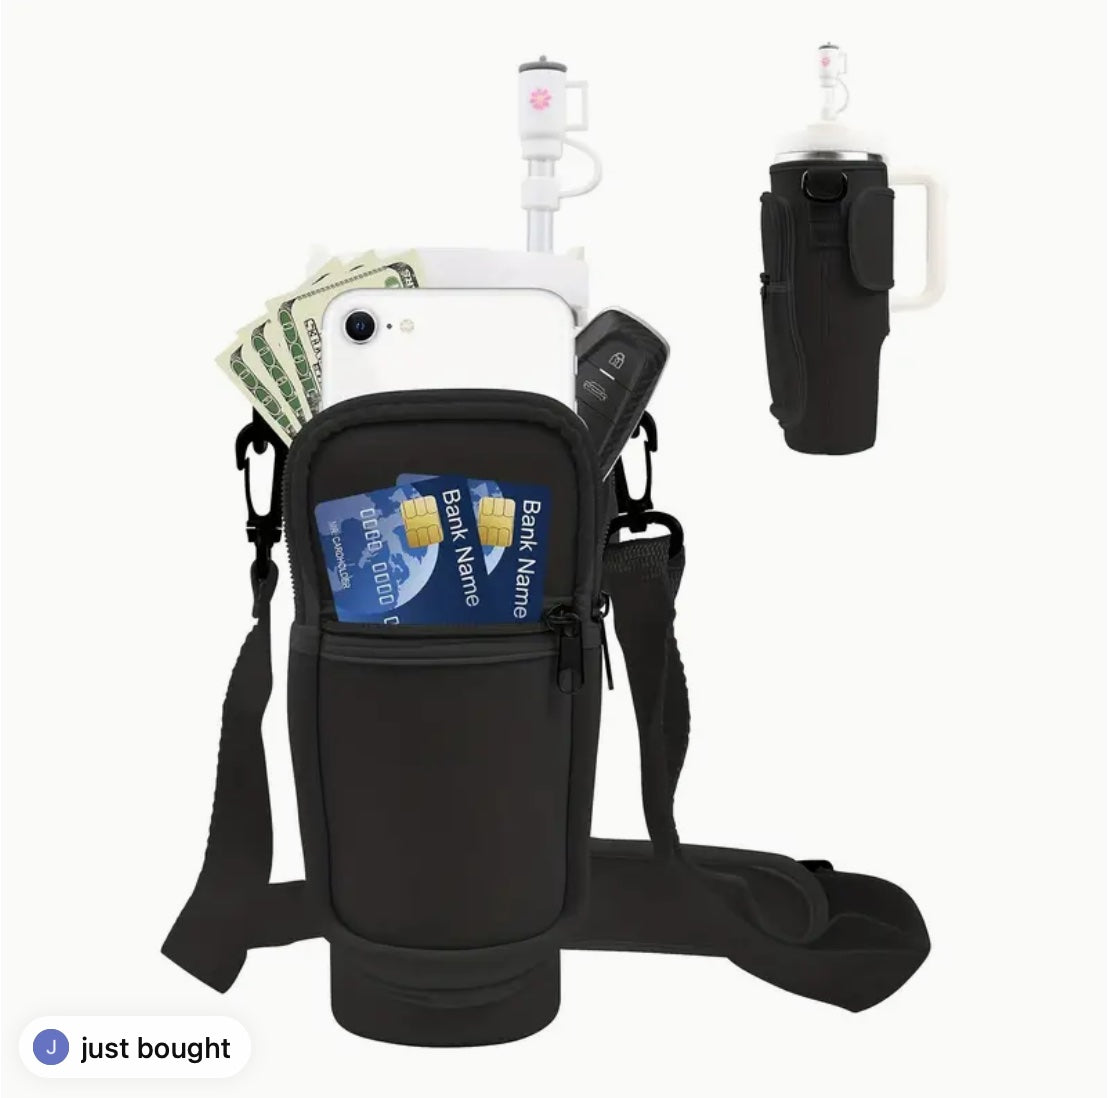 UNIVERSAL 1 PC ALL-IN-ONE DURABLE WATER TUMBLER WITH HANDLE BAG WITH ADJUSTABLE STRAP - FITS 30/40 OZ. TUMBLER CUP